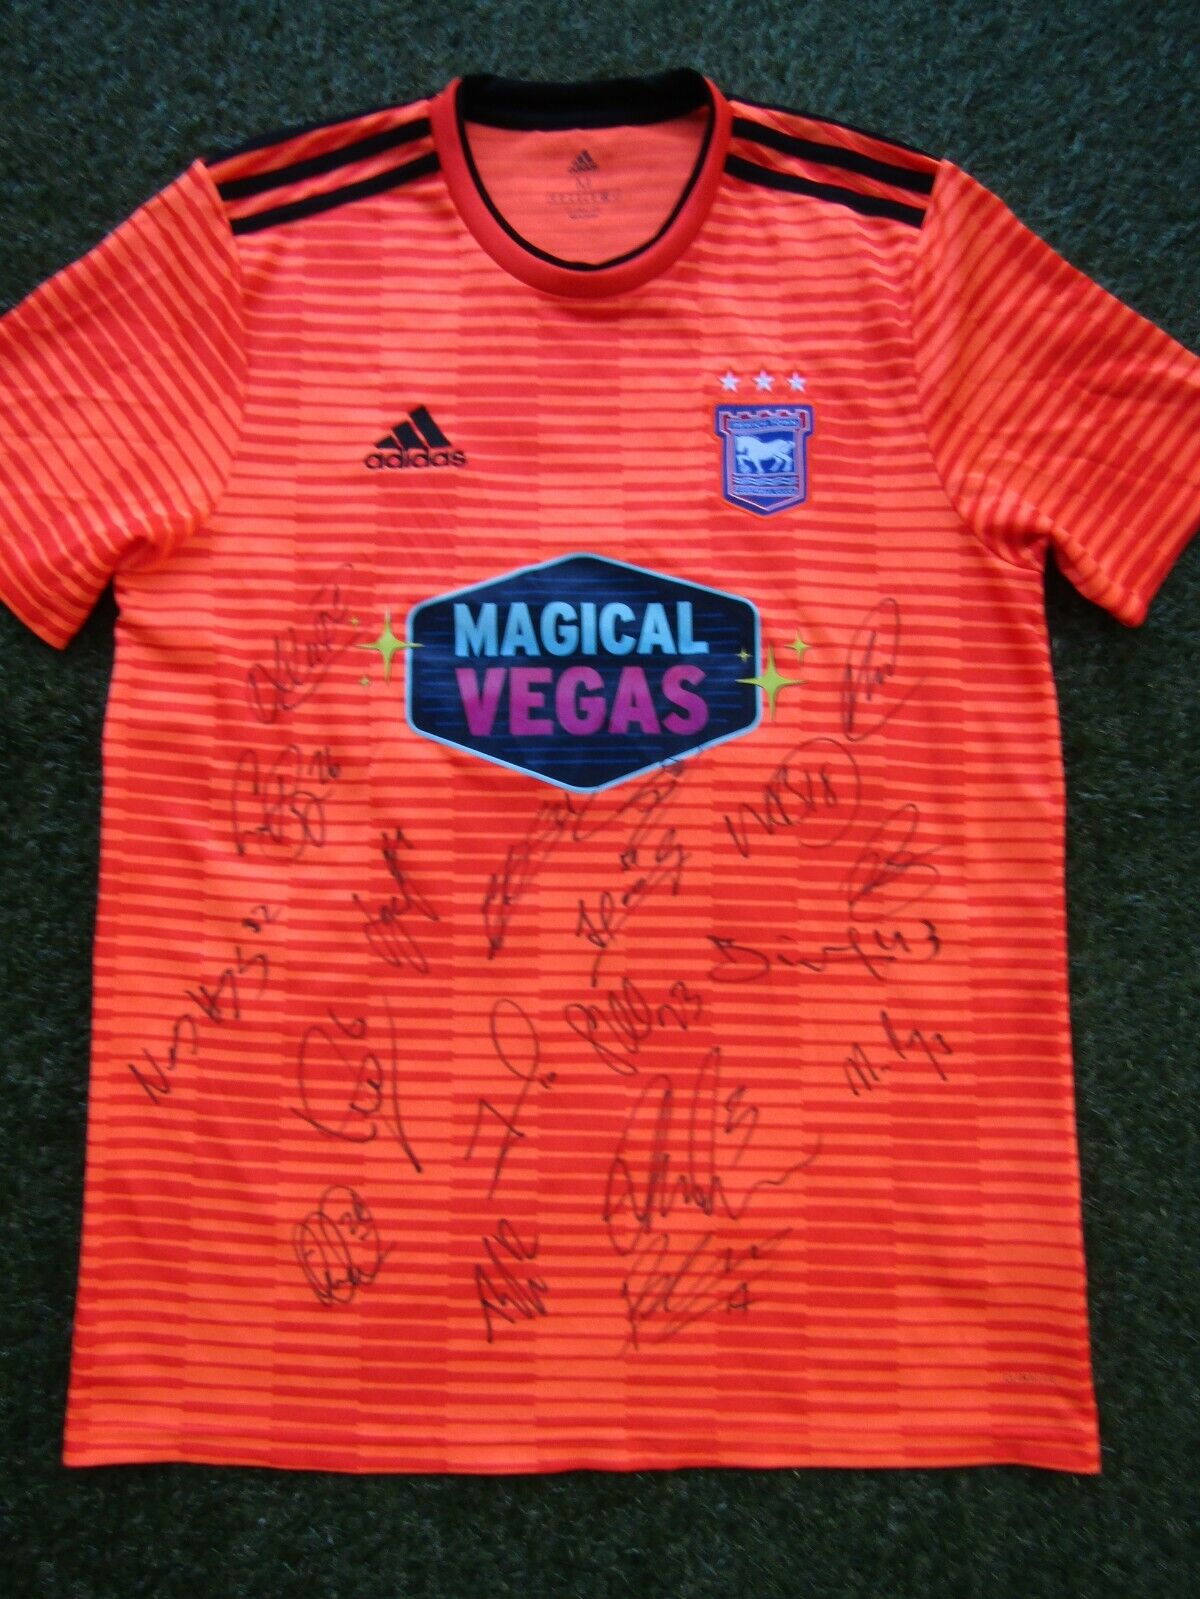 Long-awaited Ipswich Town Shirt Hand Signed by Autograph - Squad 19 2022 Alternative dealer 2021